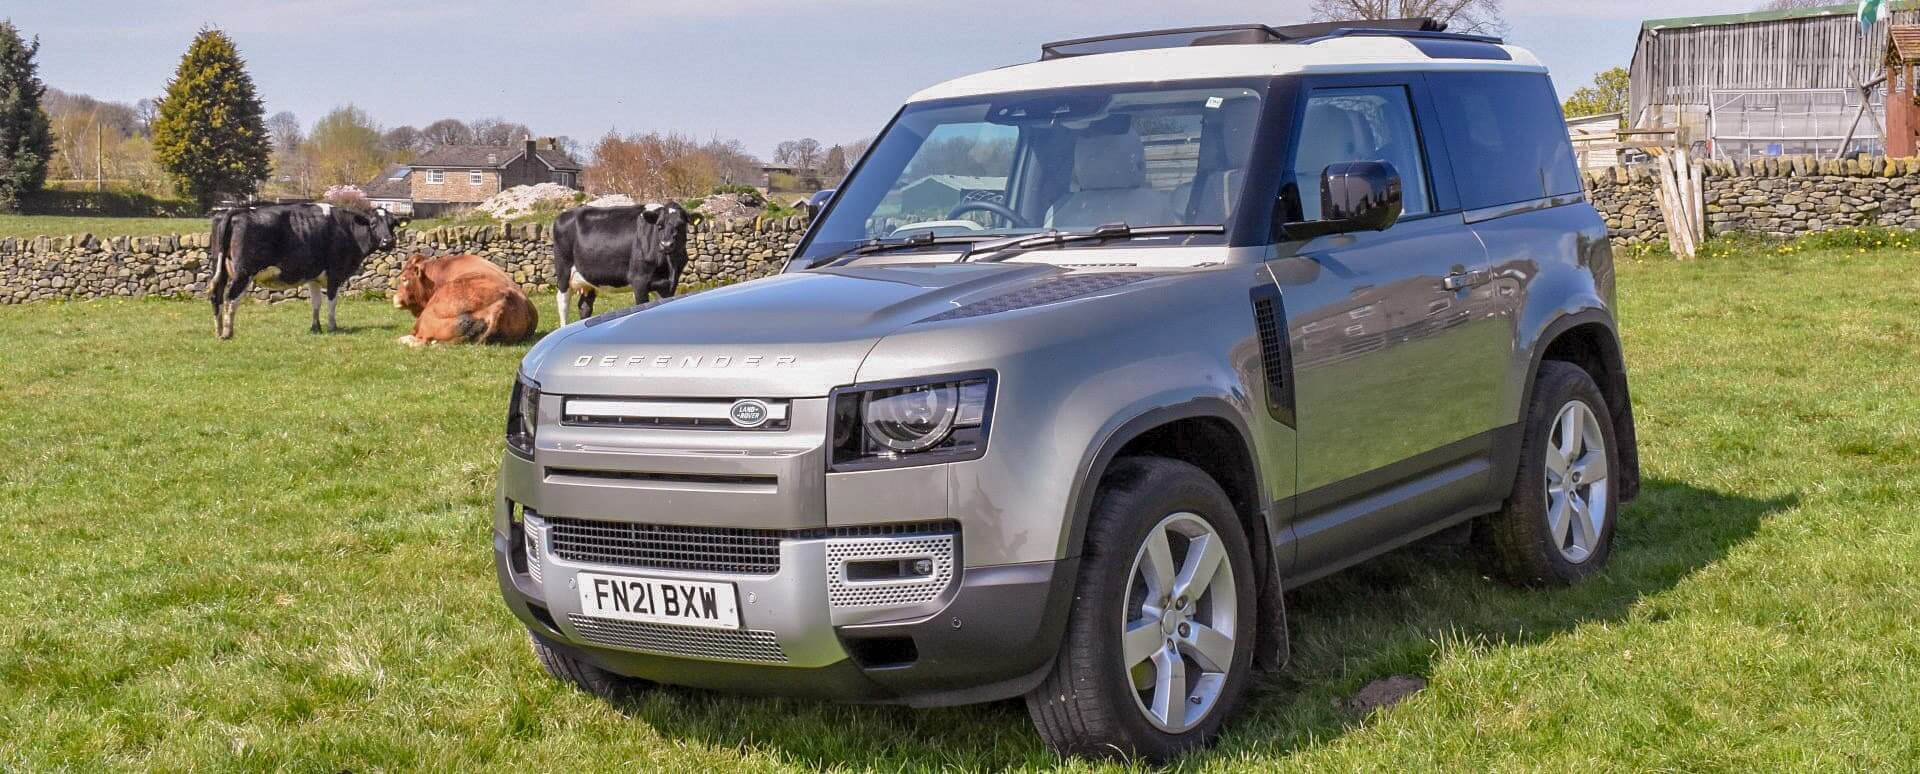 Land Rover Defender 90 and Cows